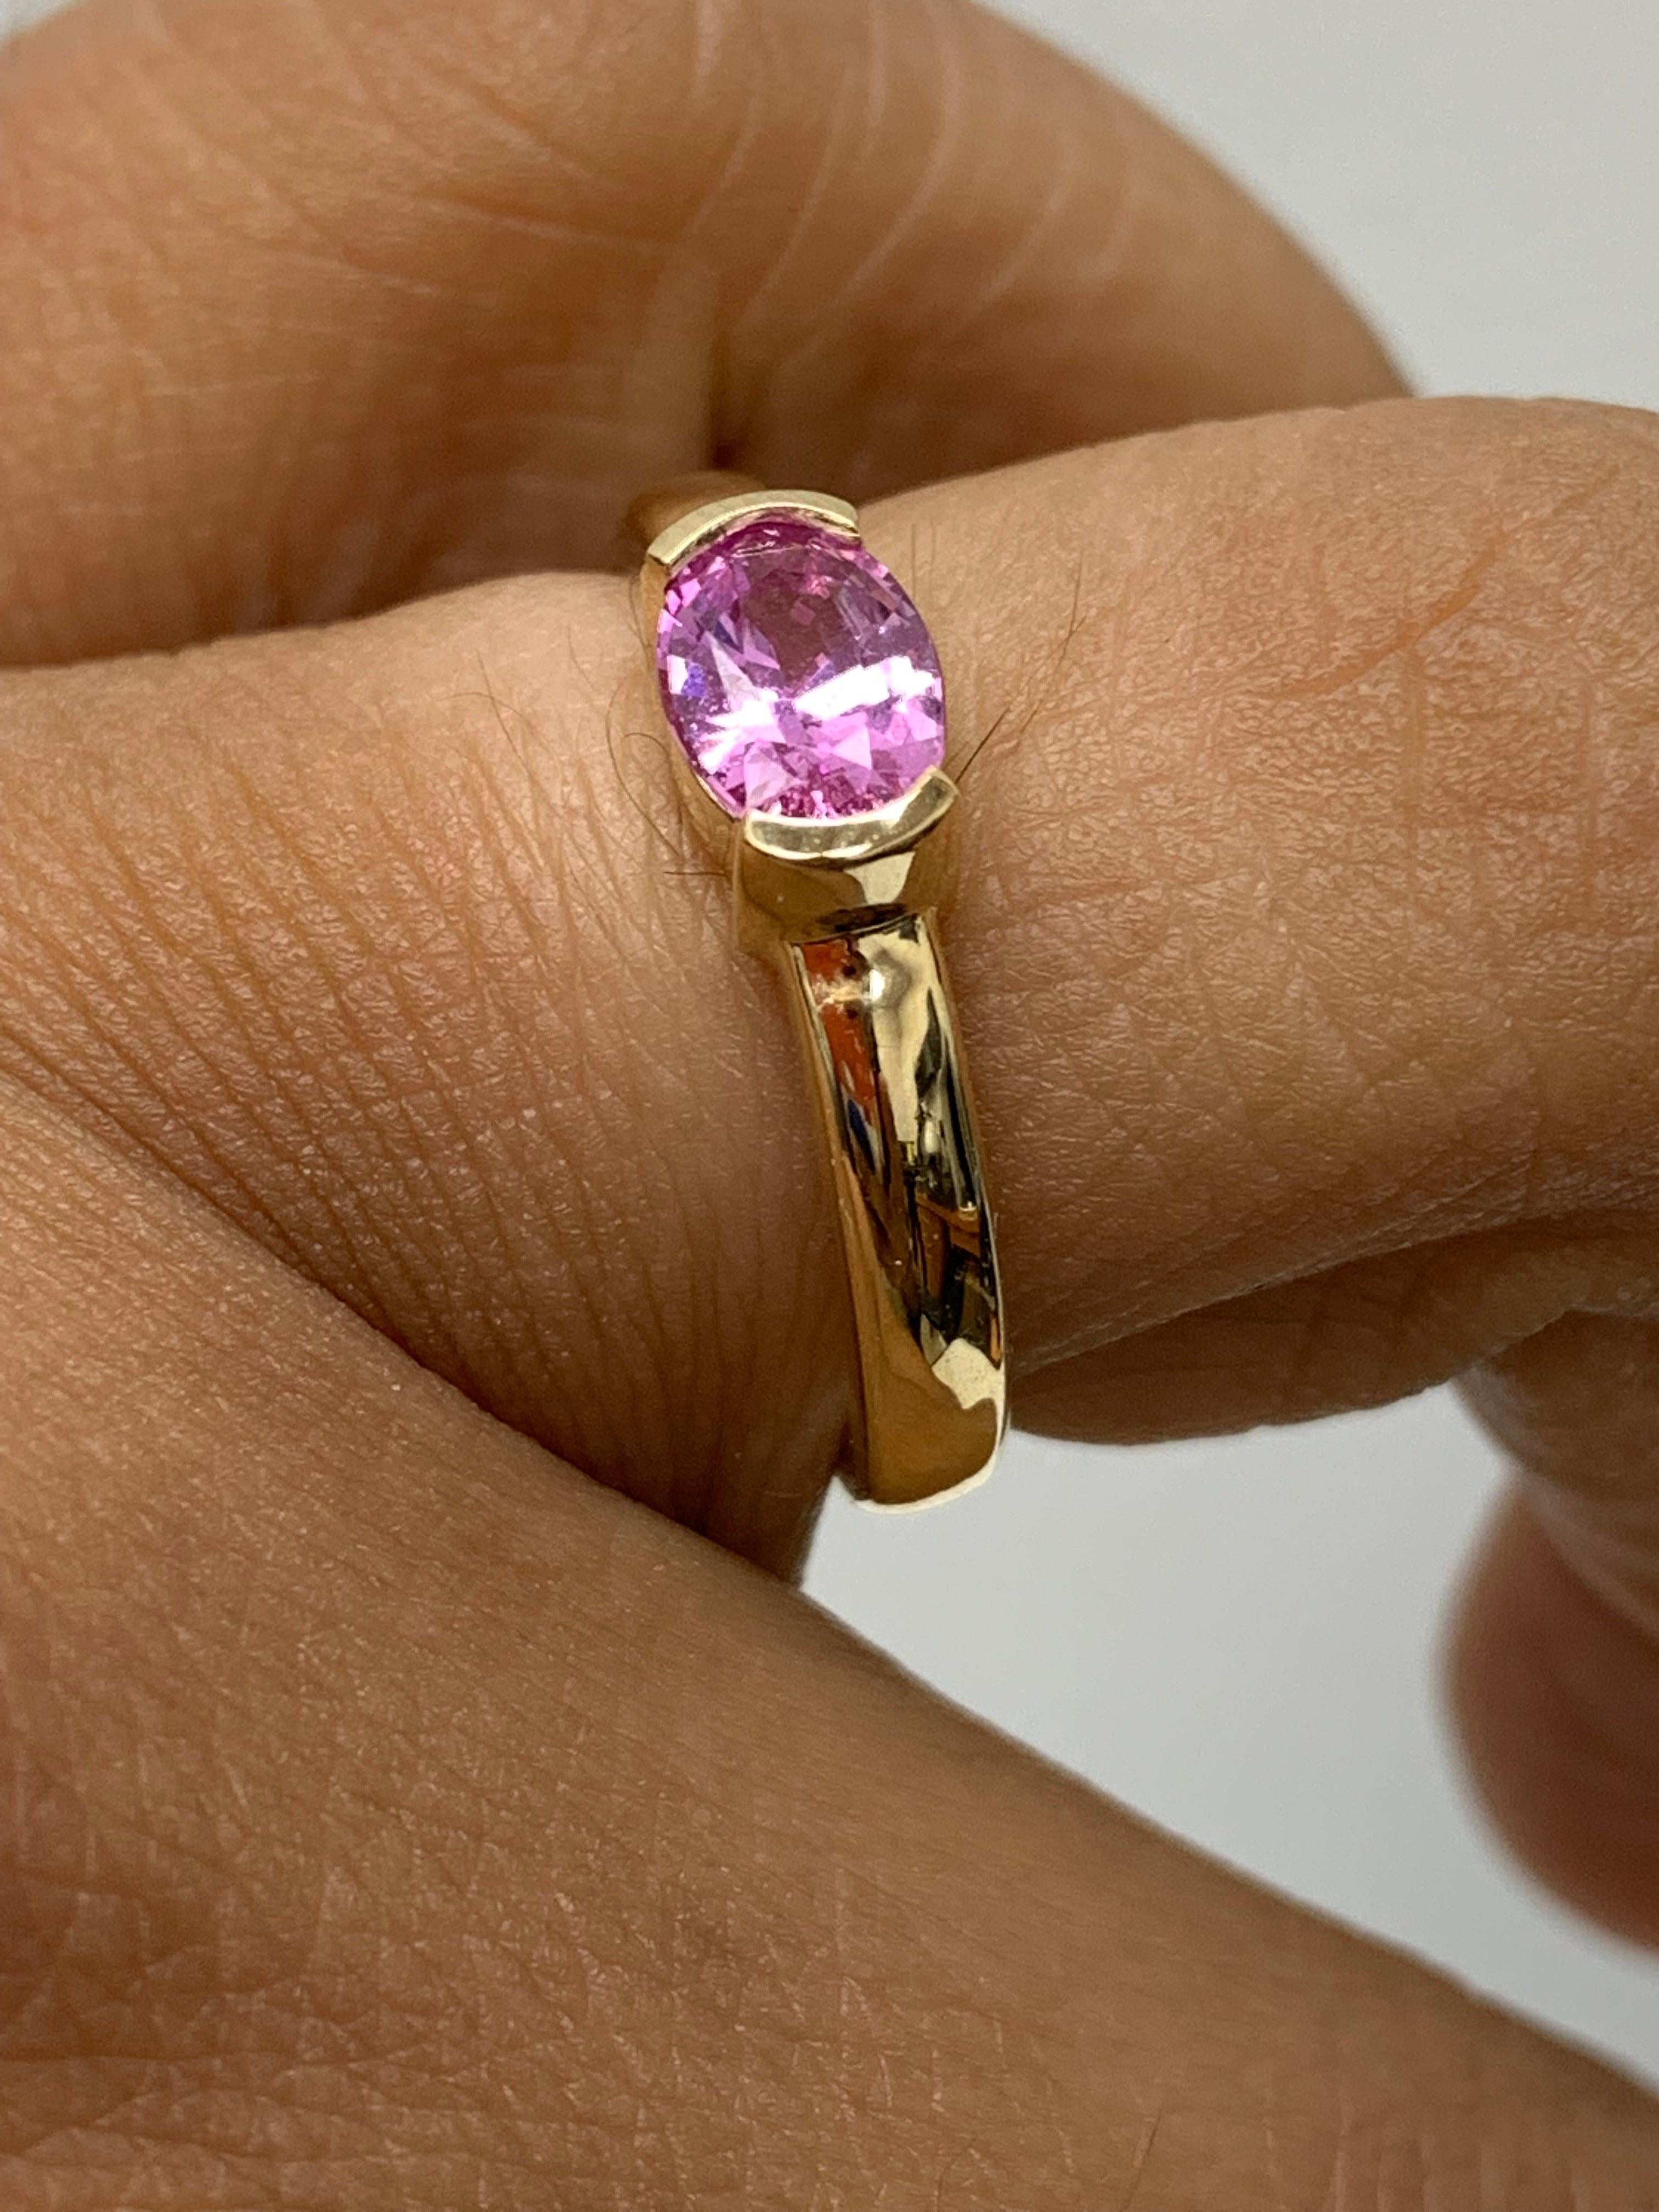 0.73 Carat Oval Cut Pink Sapphire Band Ring in 14K Yellow Gold For Sale 1